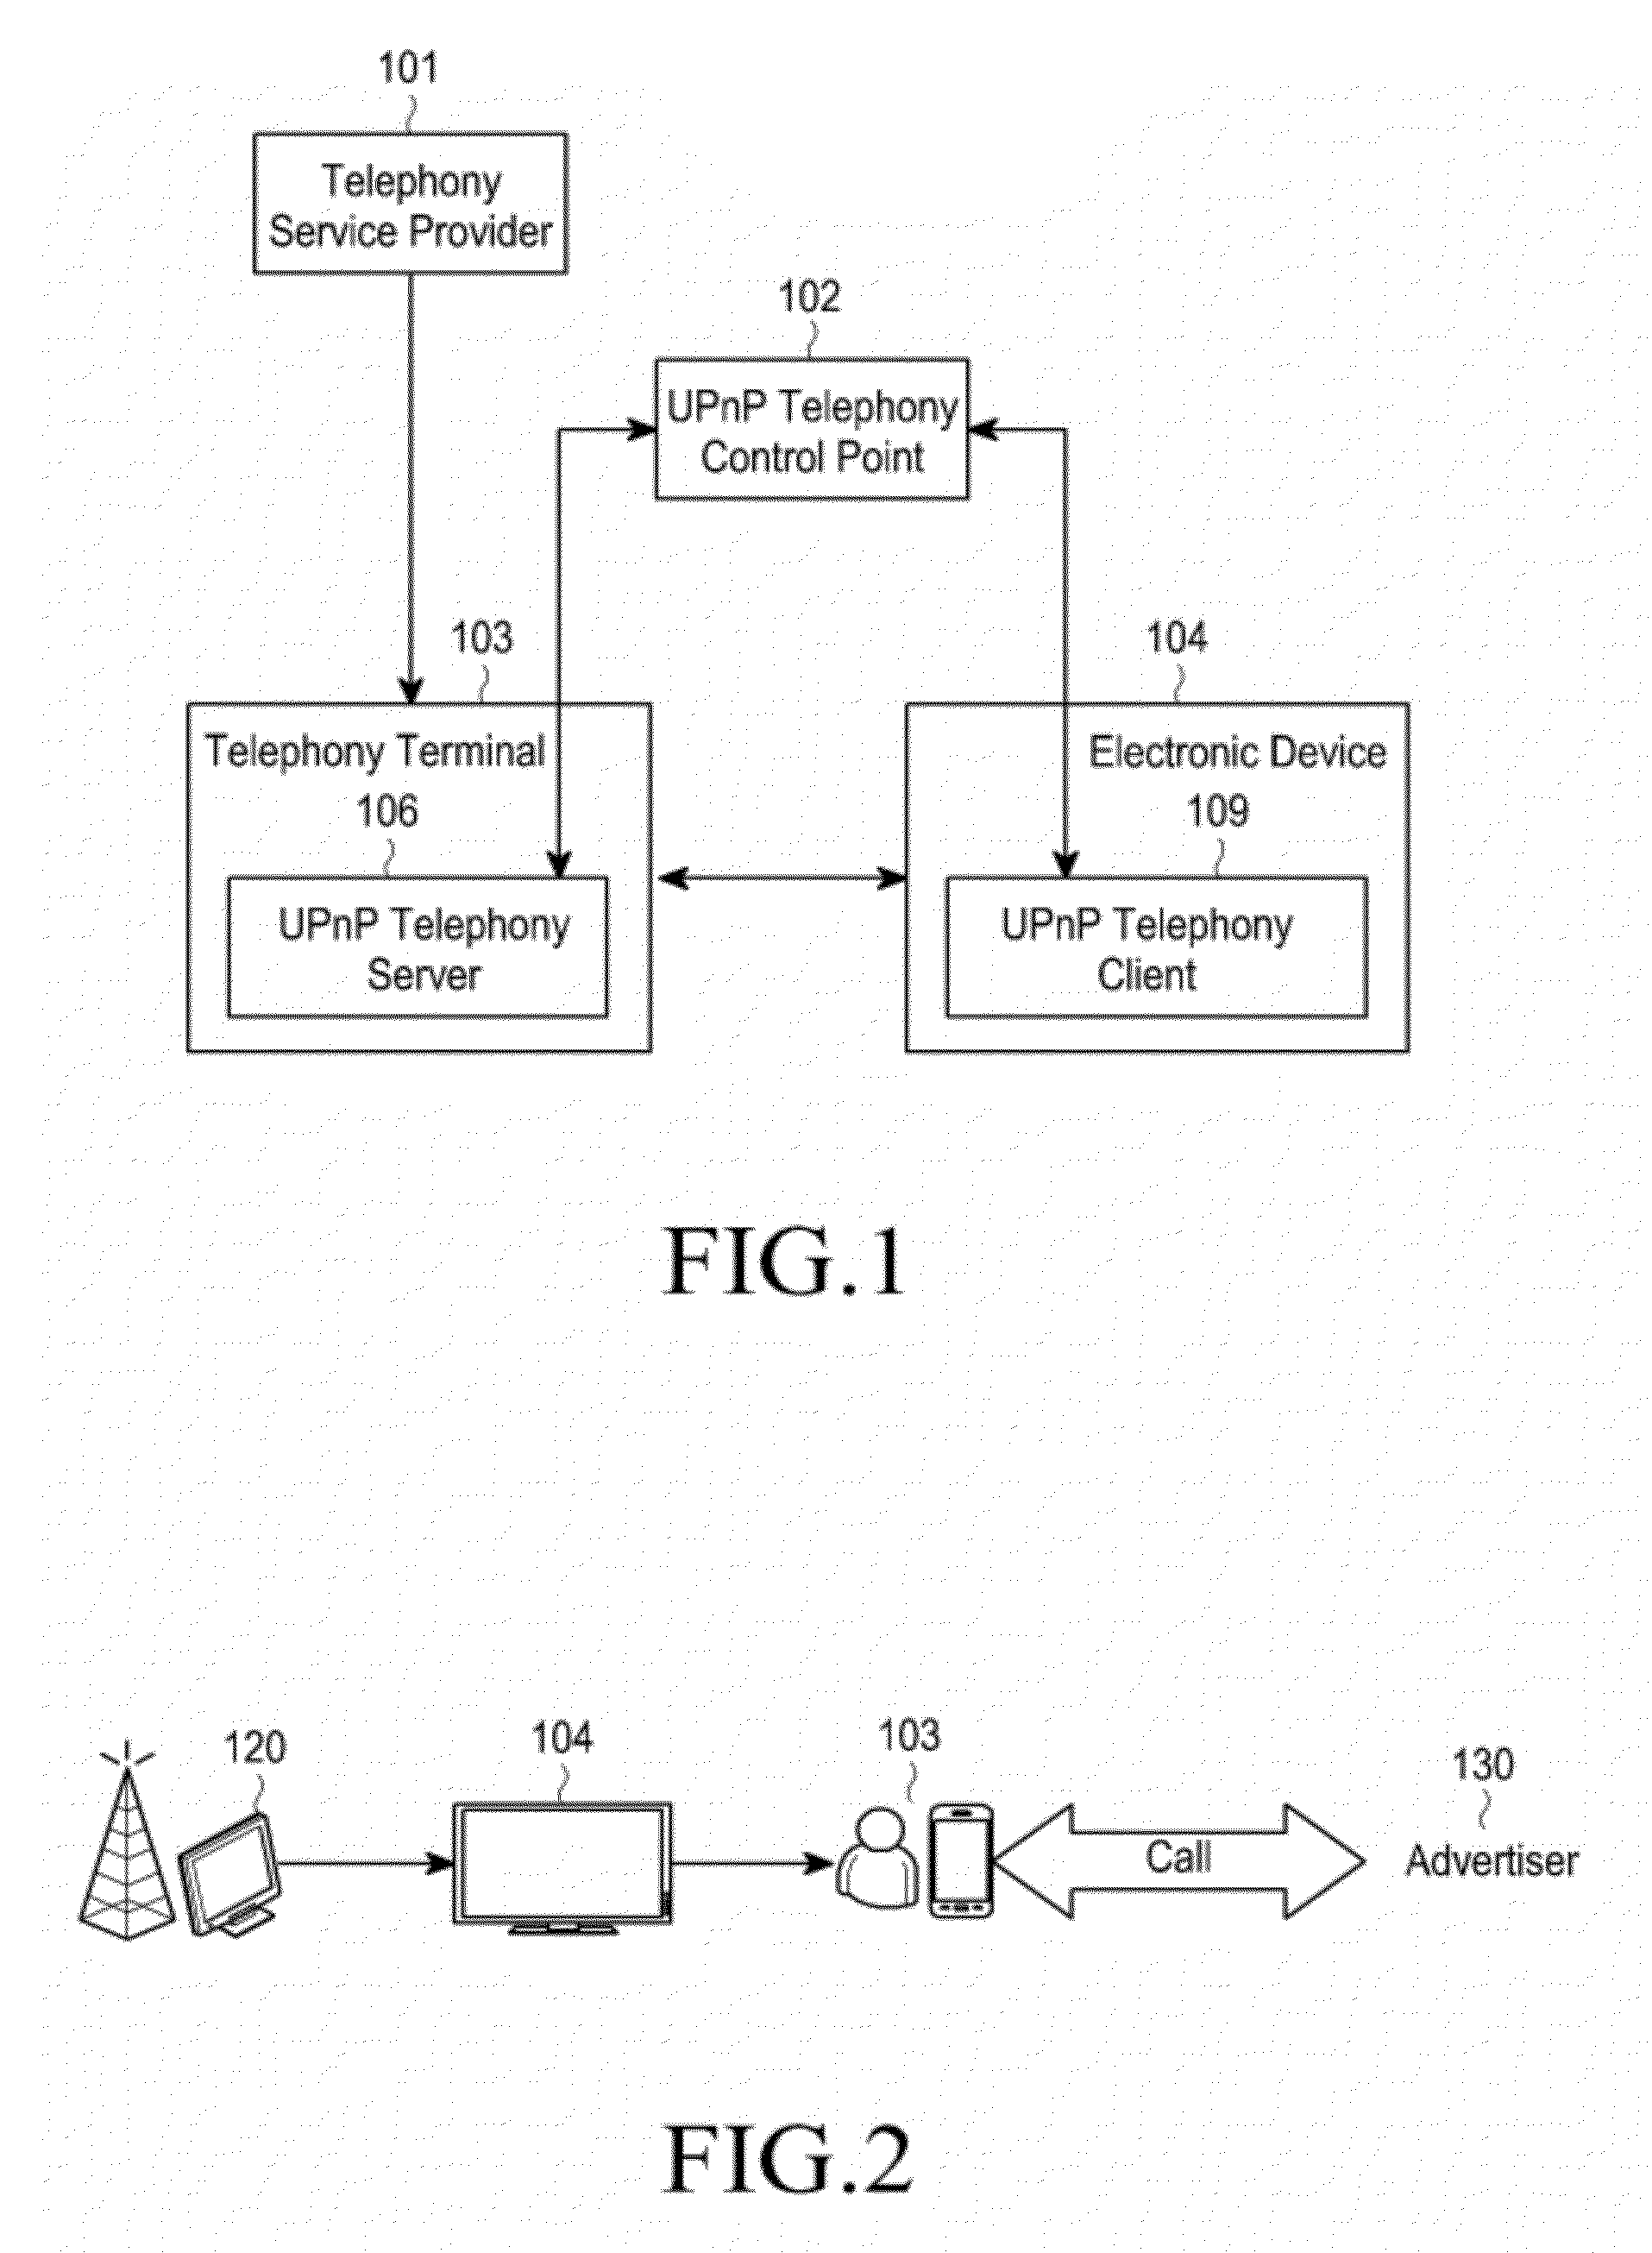 Apparatus and method for providing click-to-call service